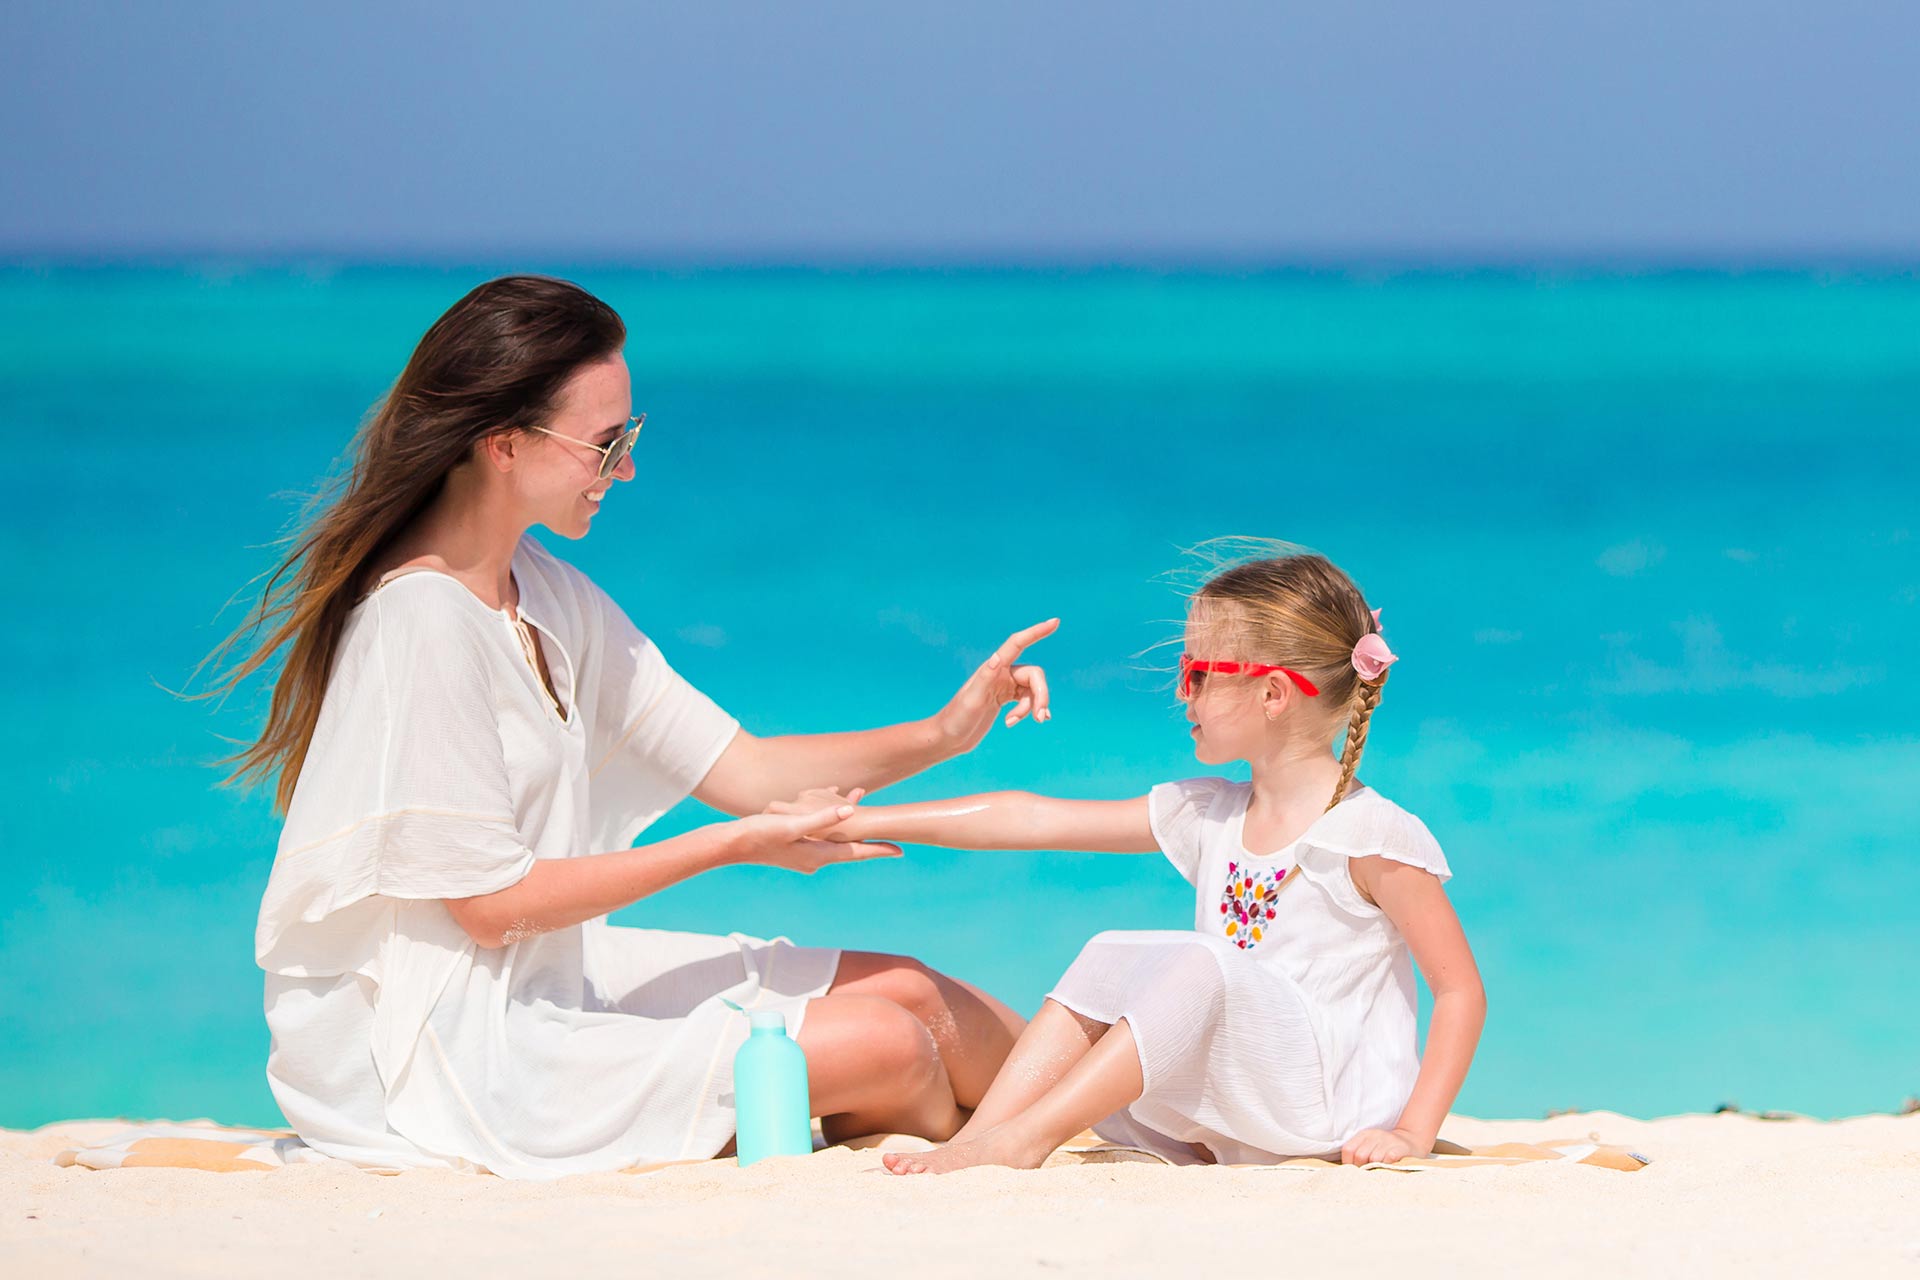 A mom applying sunscreen on her daughter.